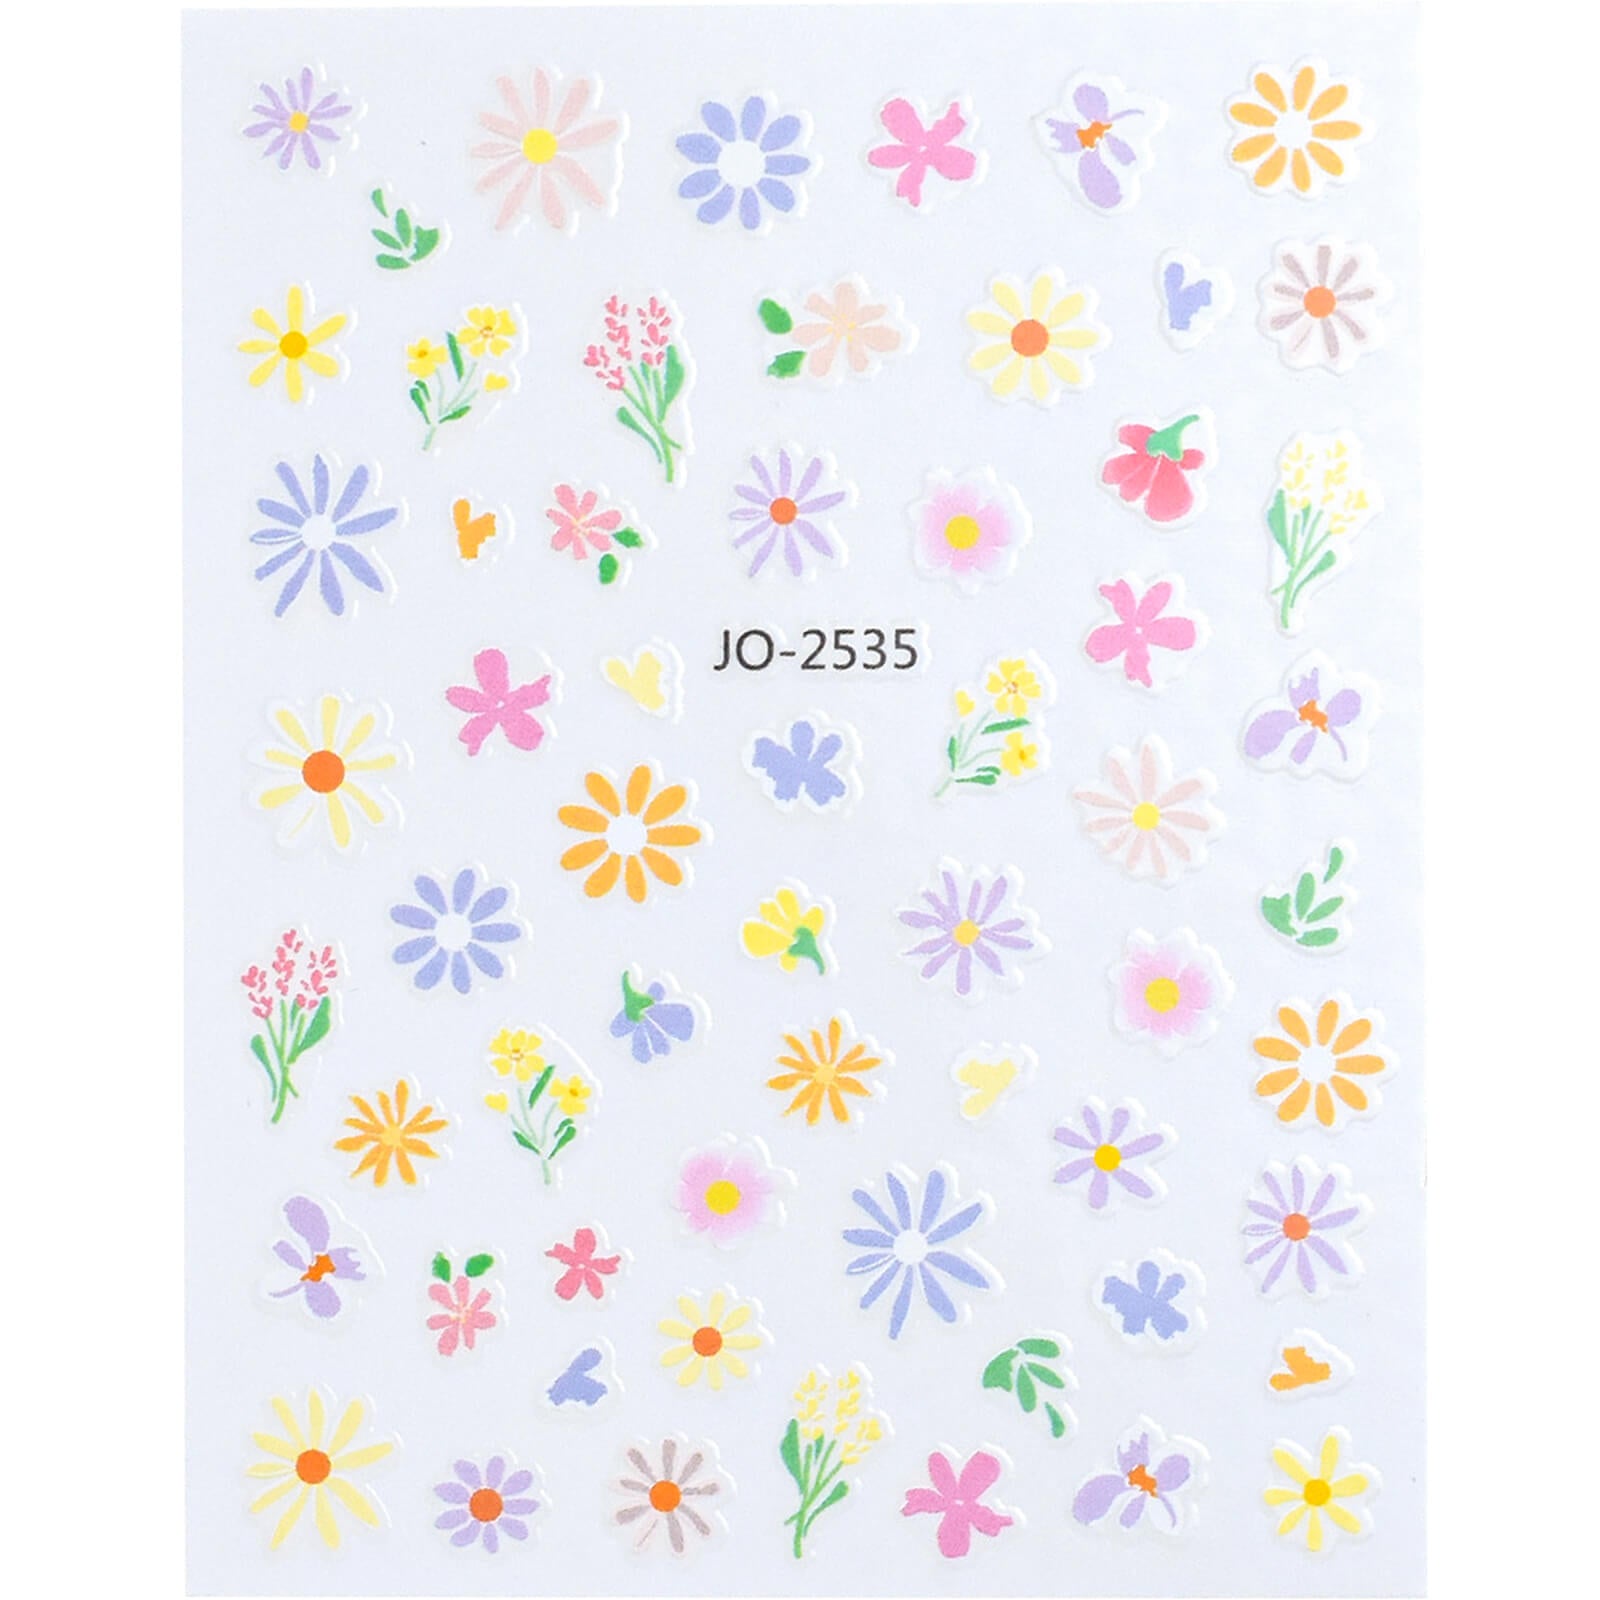 mini-colorful-nail-art-flower-stickers-floral-2535